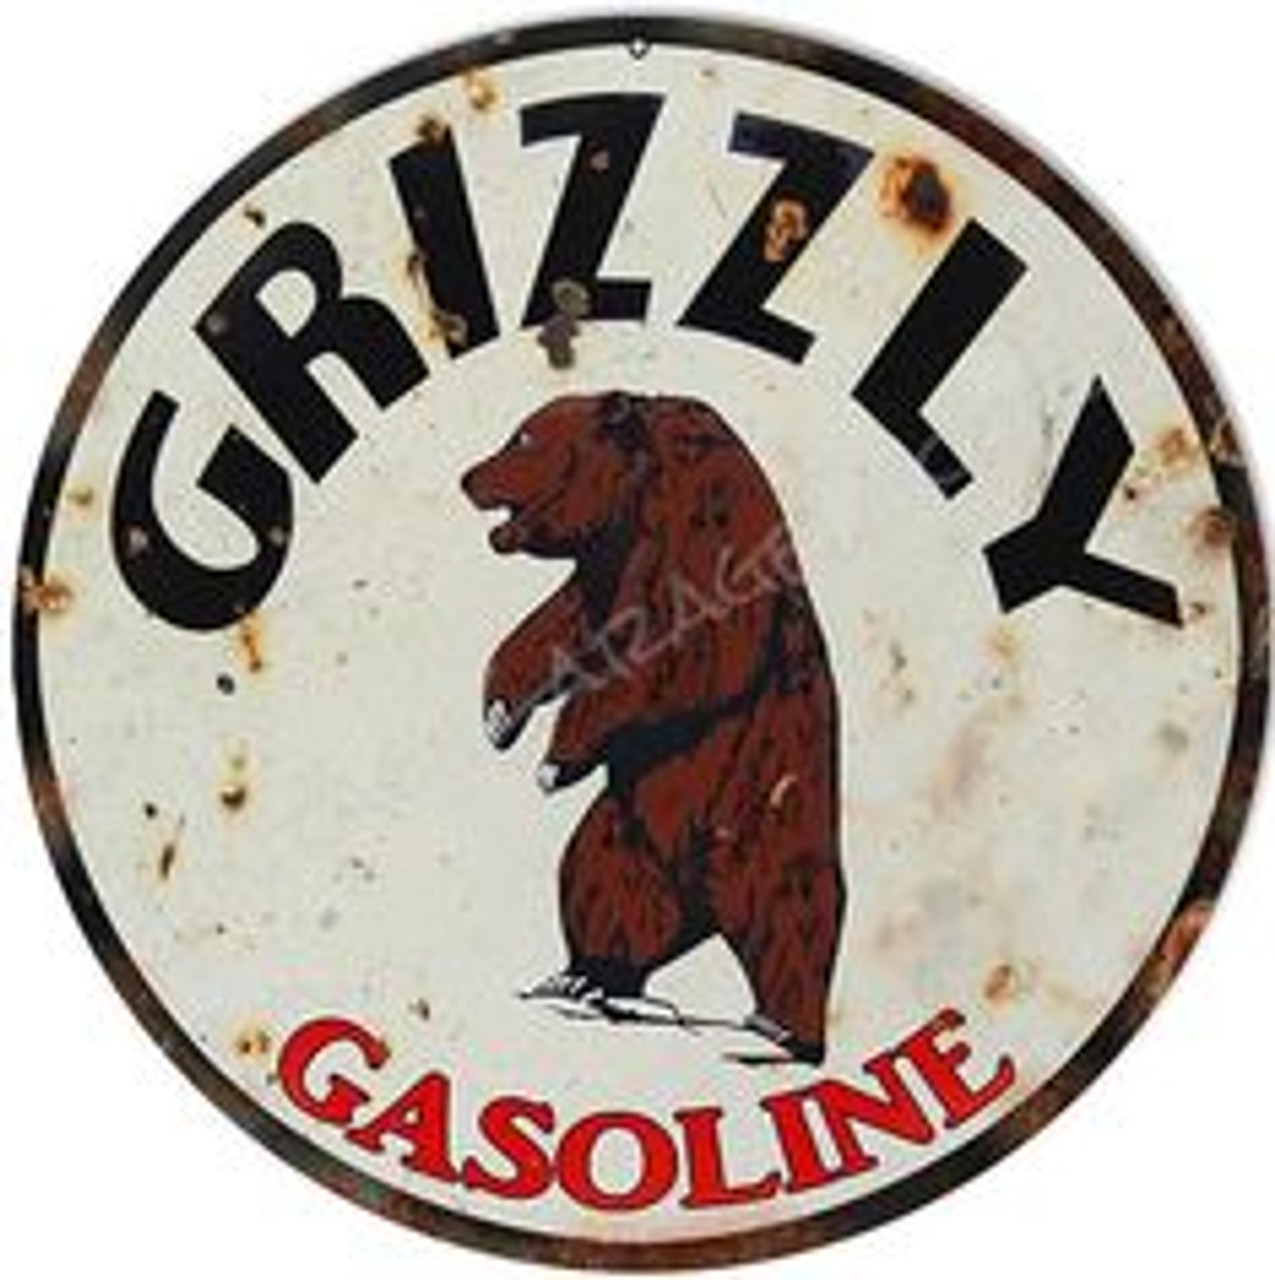 Grizzly Gasoline Christmas Ornament